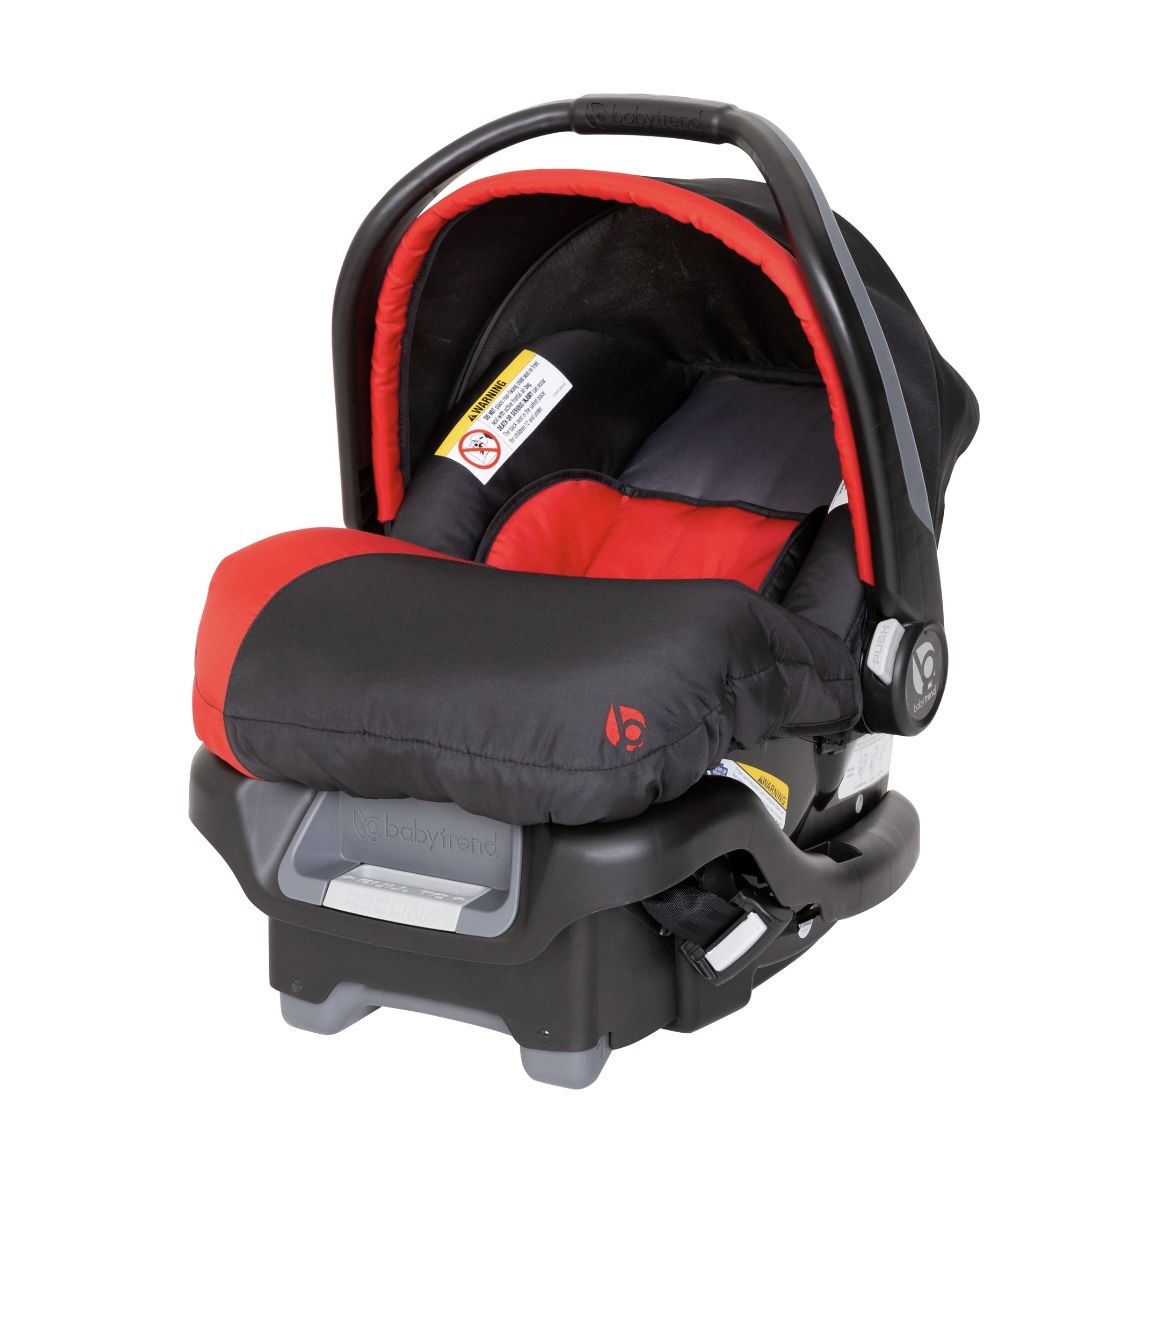 Baby Trend 35 lbs Infant Car Seat